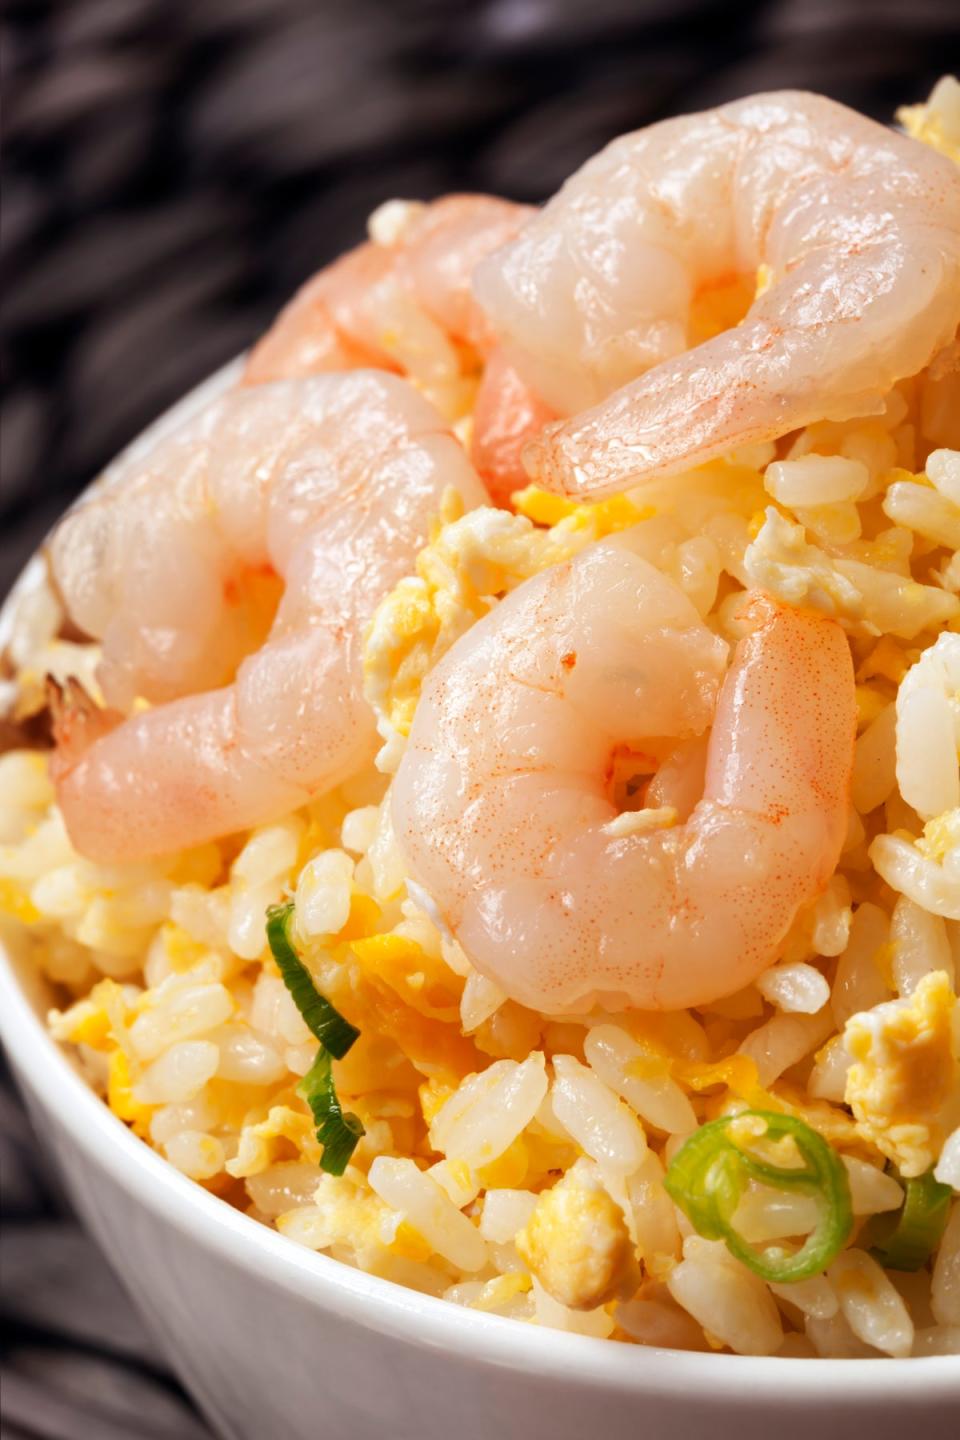 This quick fried-rice dish is a veritable comfort (Getty/iStock)